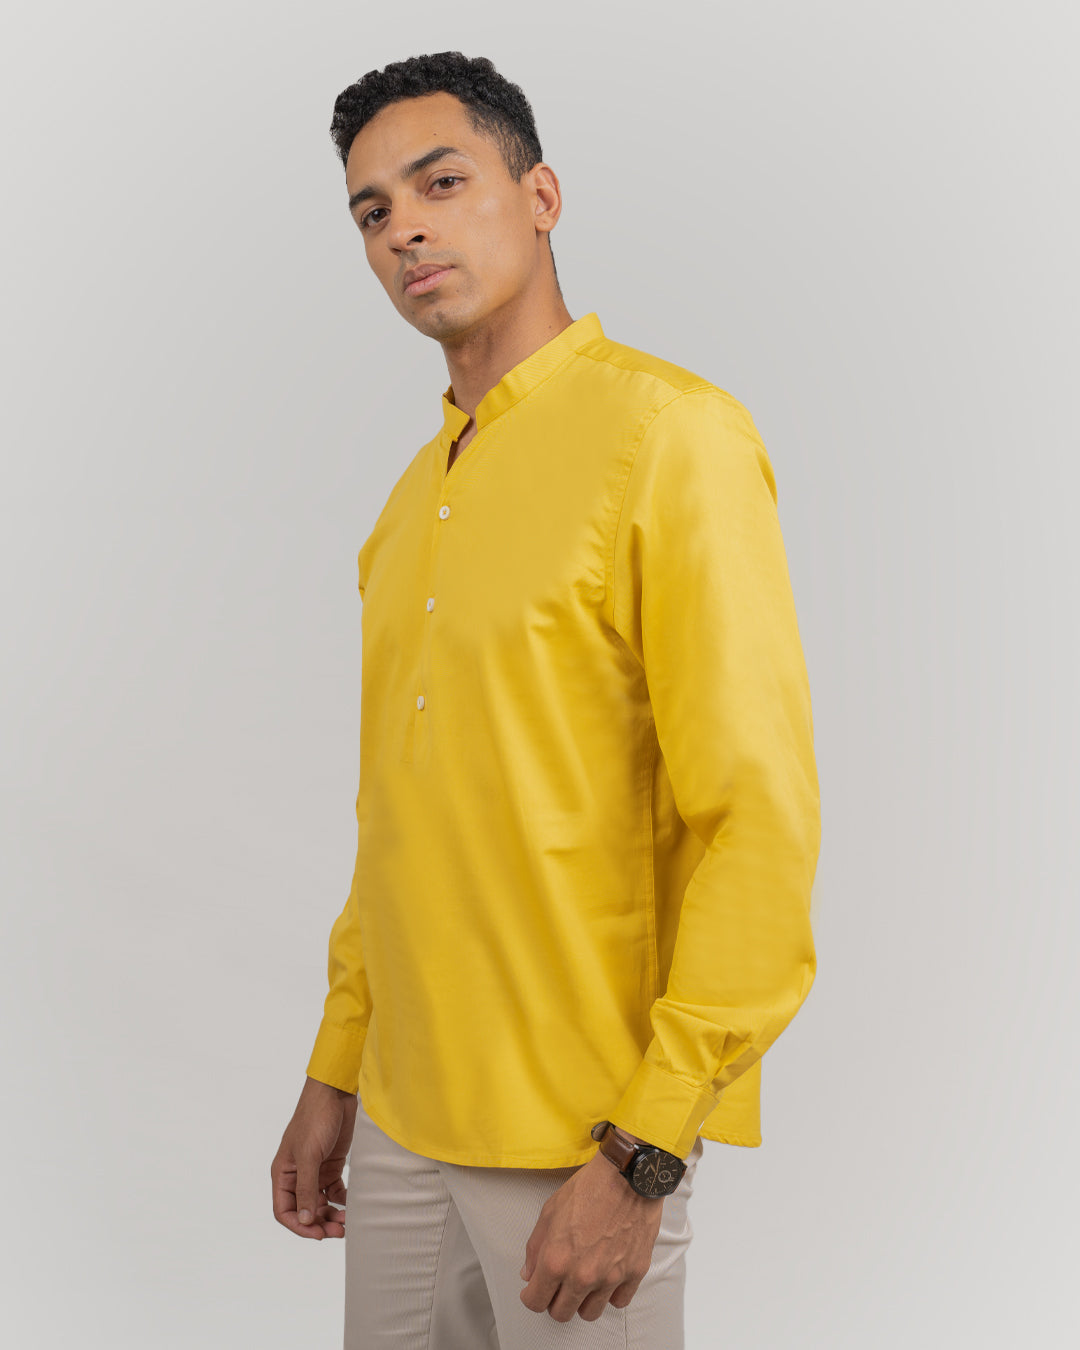 Comfortable traditional yellow short kurta for men, ideal for casual and festive wear.